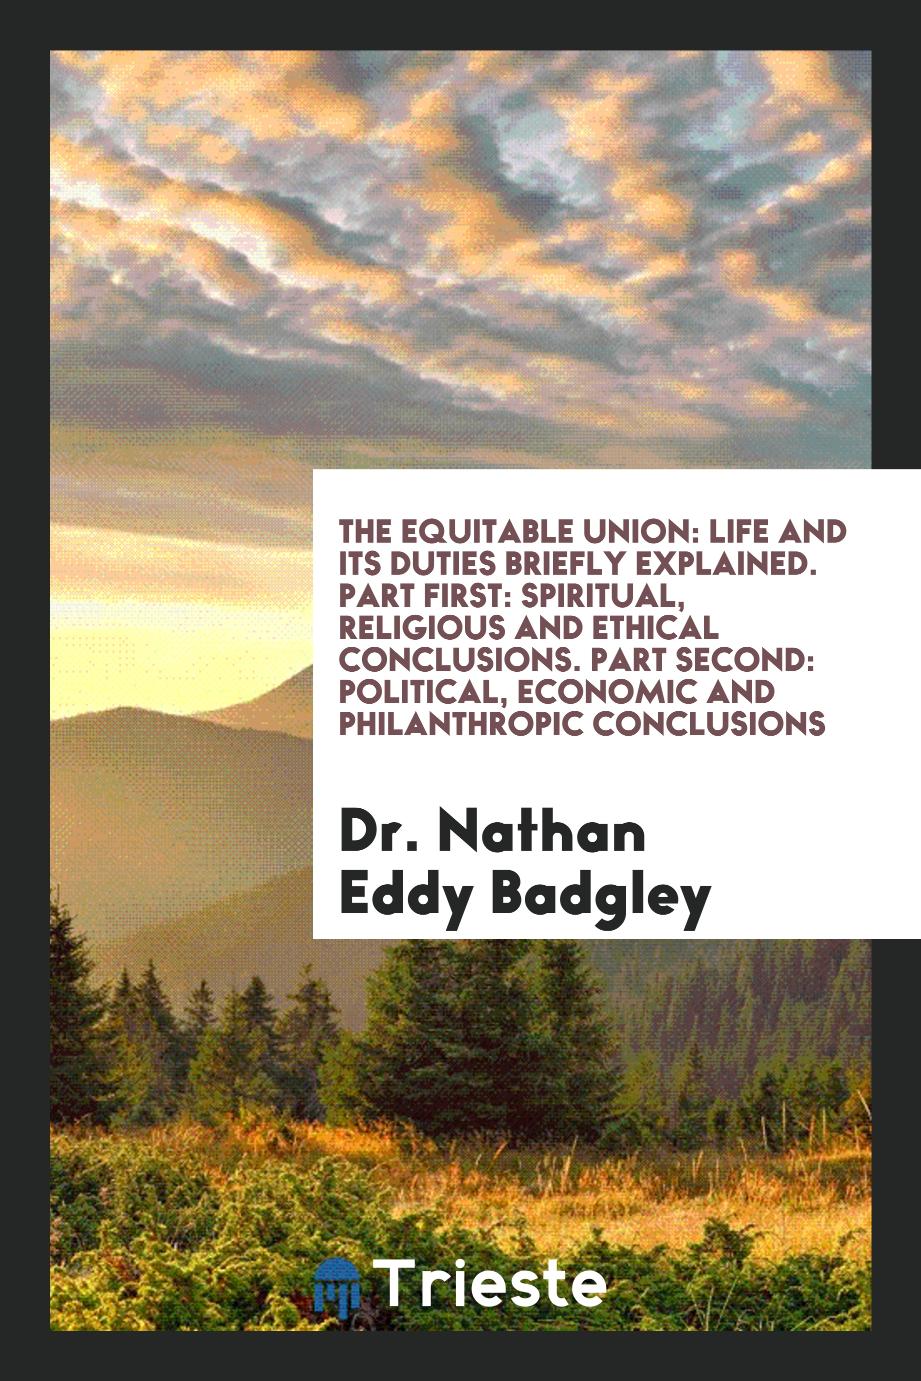 Dr. Nathan Eddy Badgley - The Equitable Union: Life and Its Duties Briefly Explained. Part First: Spiritual, Religious and Ethical Conclusions. Part Second: Political, Economic and Philanthropic Conclusions